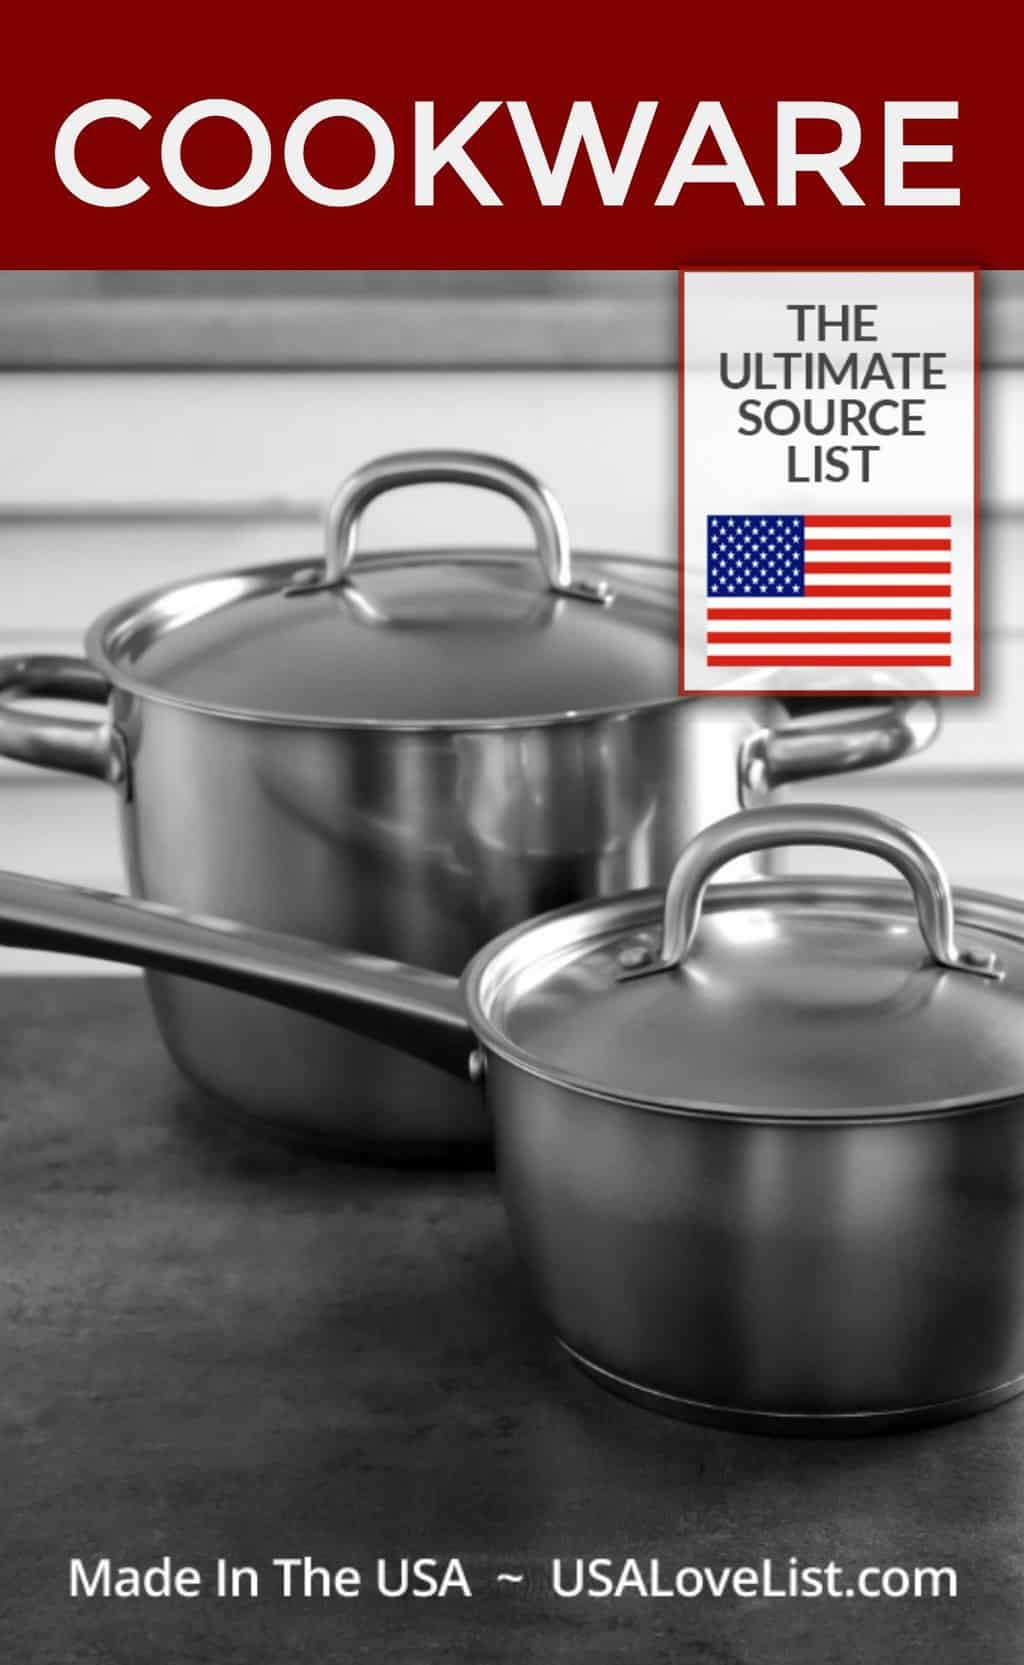 Made In USA Cookware Source List For American Made Pots Pans 